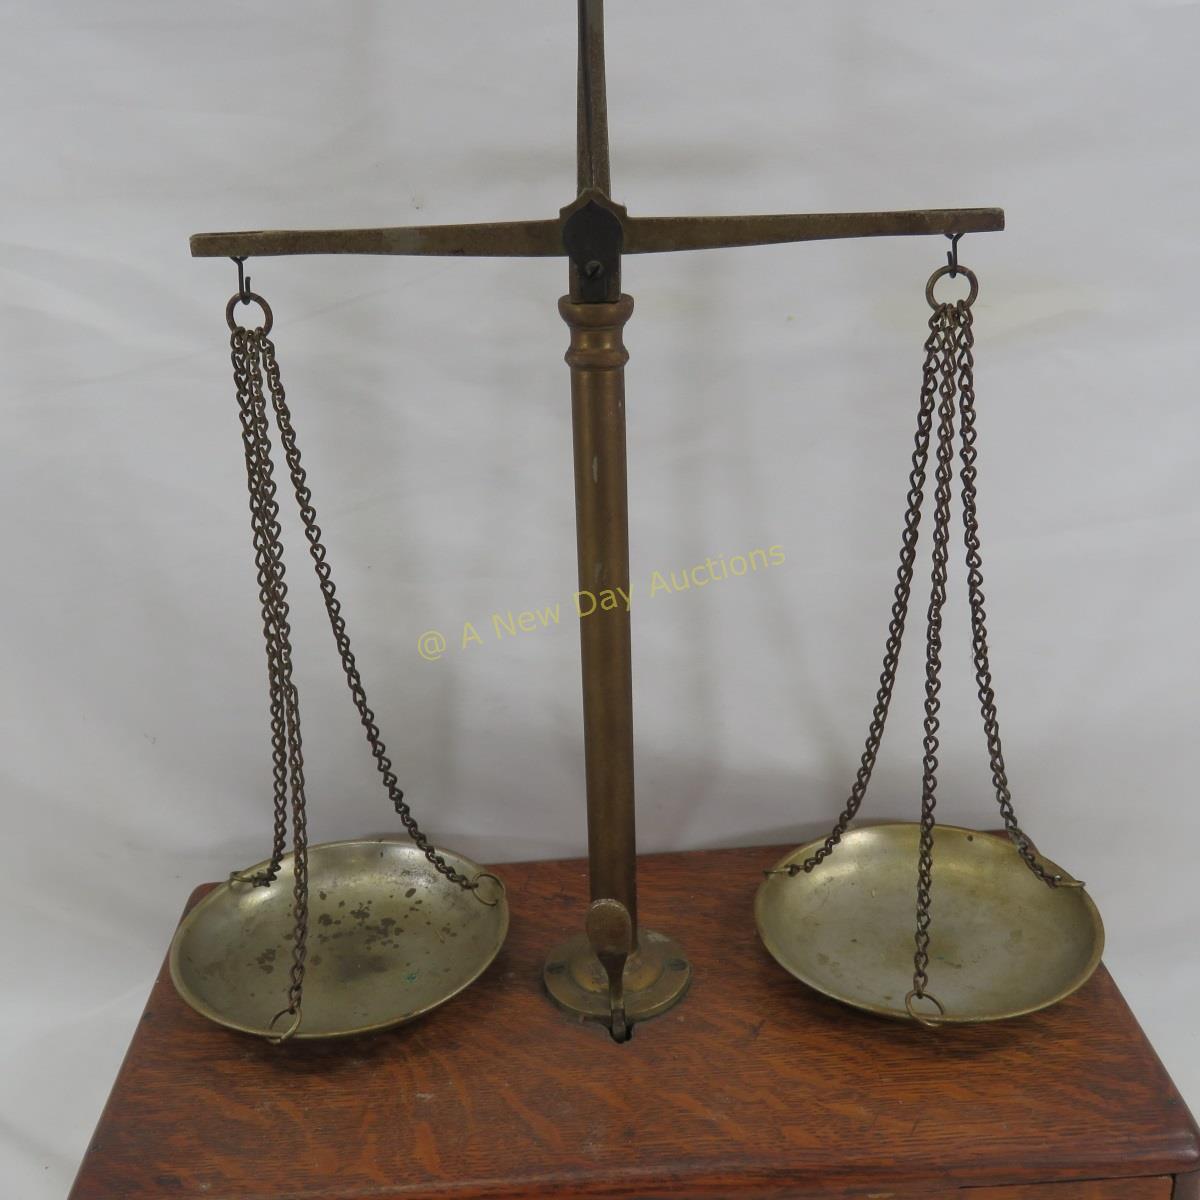 Antique Scale Balance with weight sets